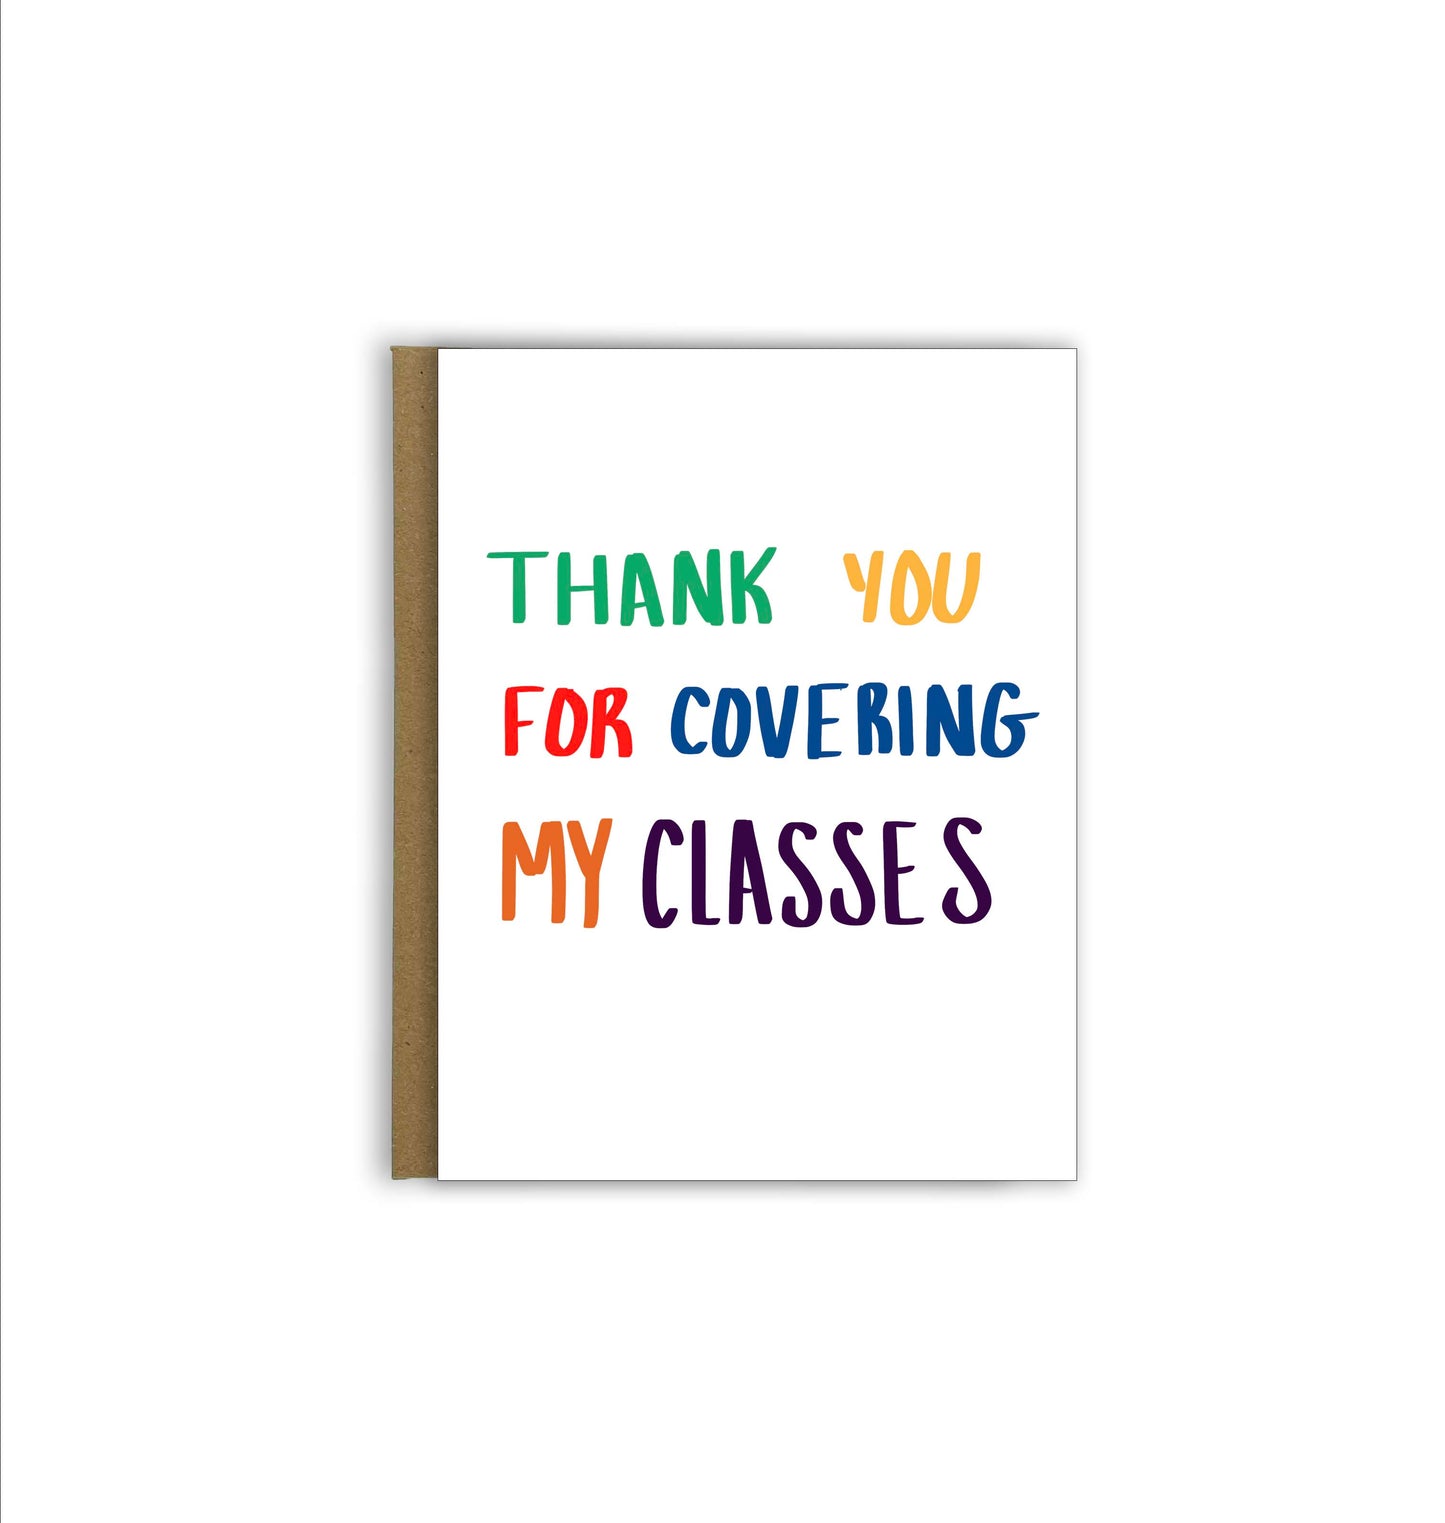 Thank You for Covering My Classes | Teacher Appreciation Cards For Teachers By Teachers